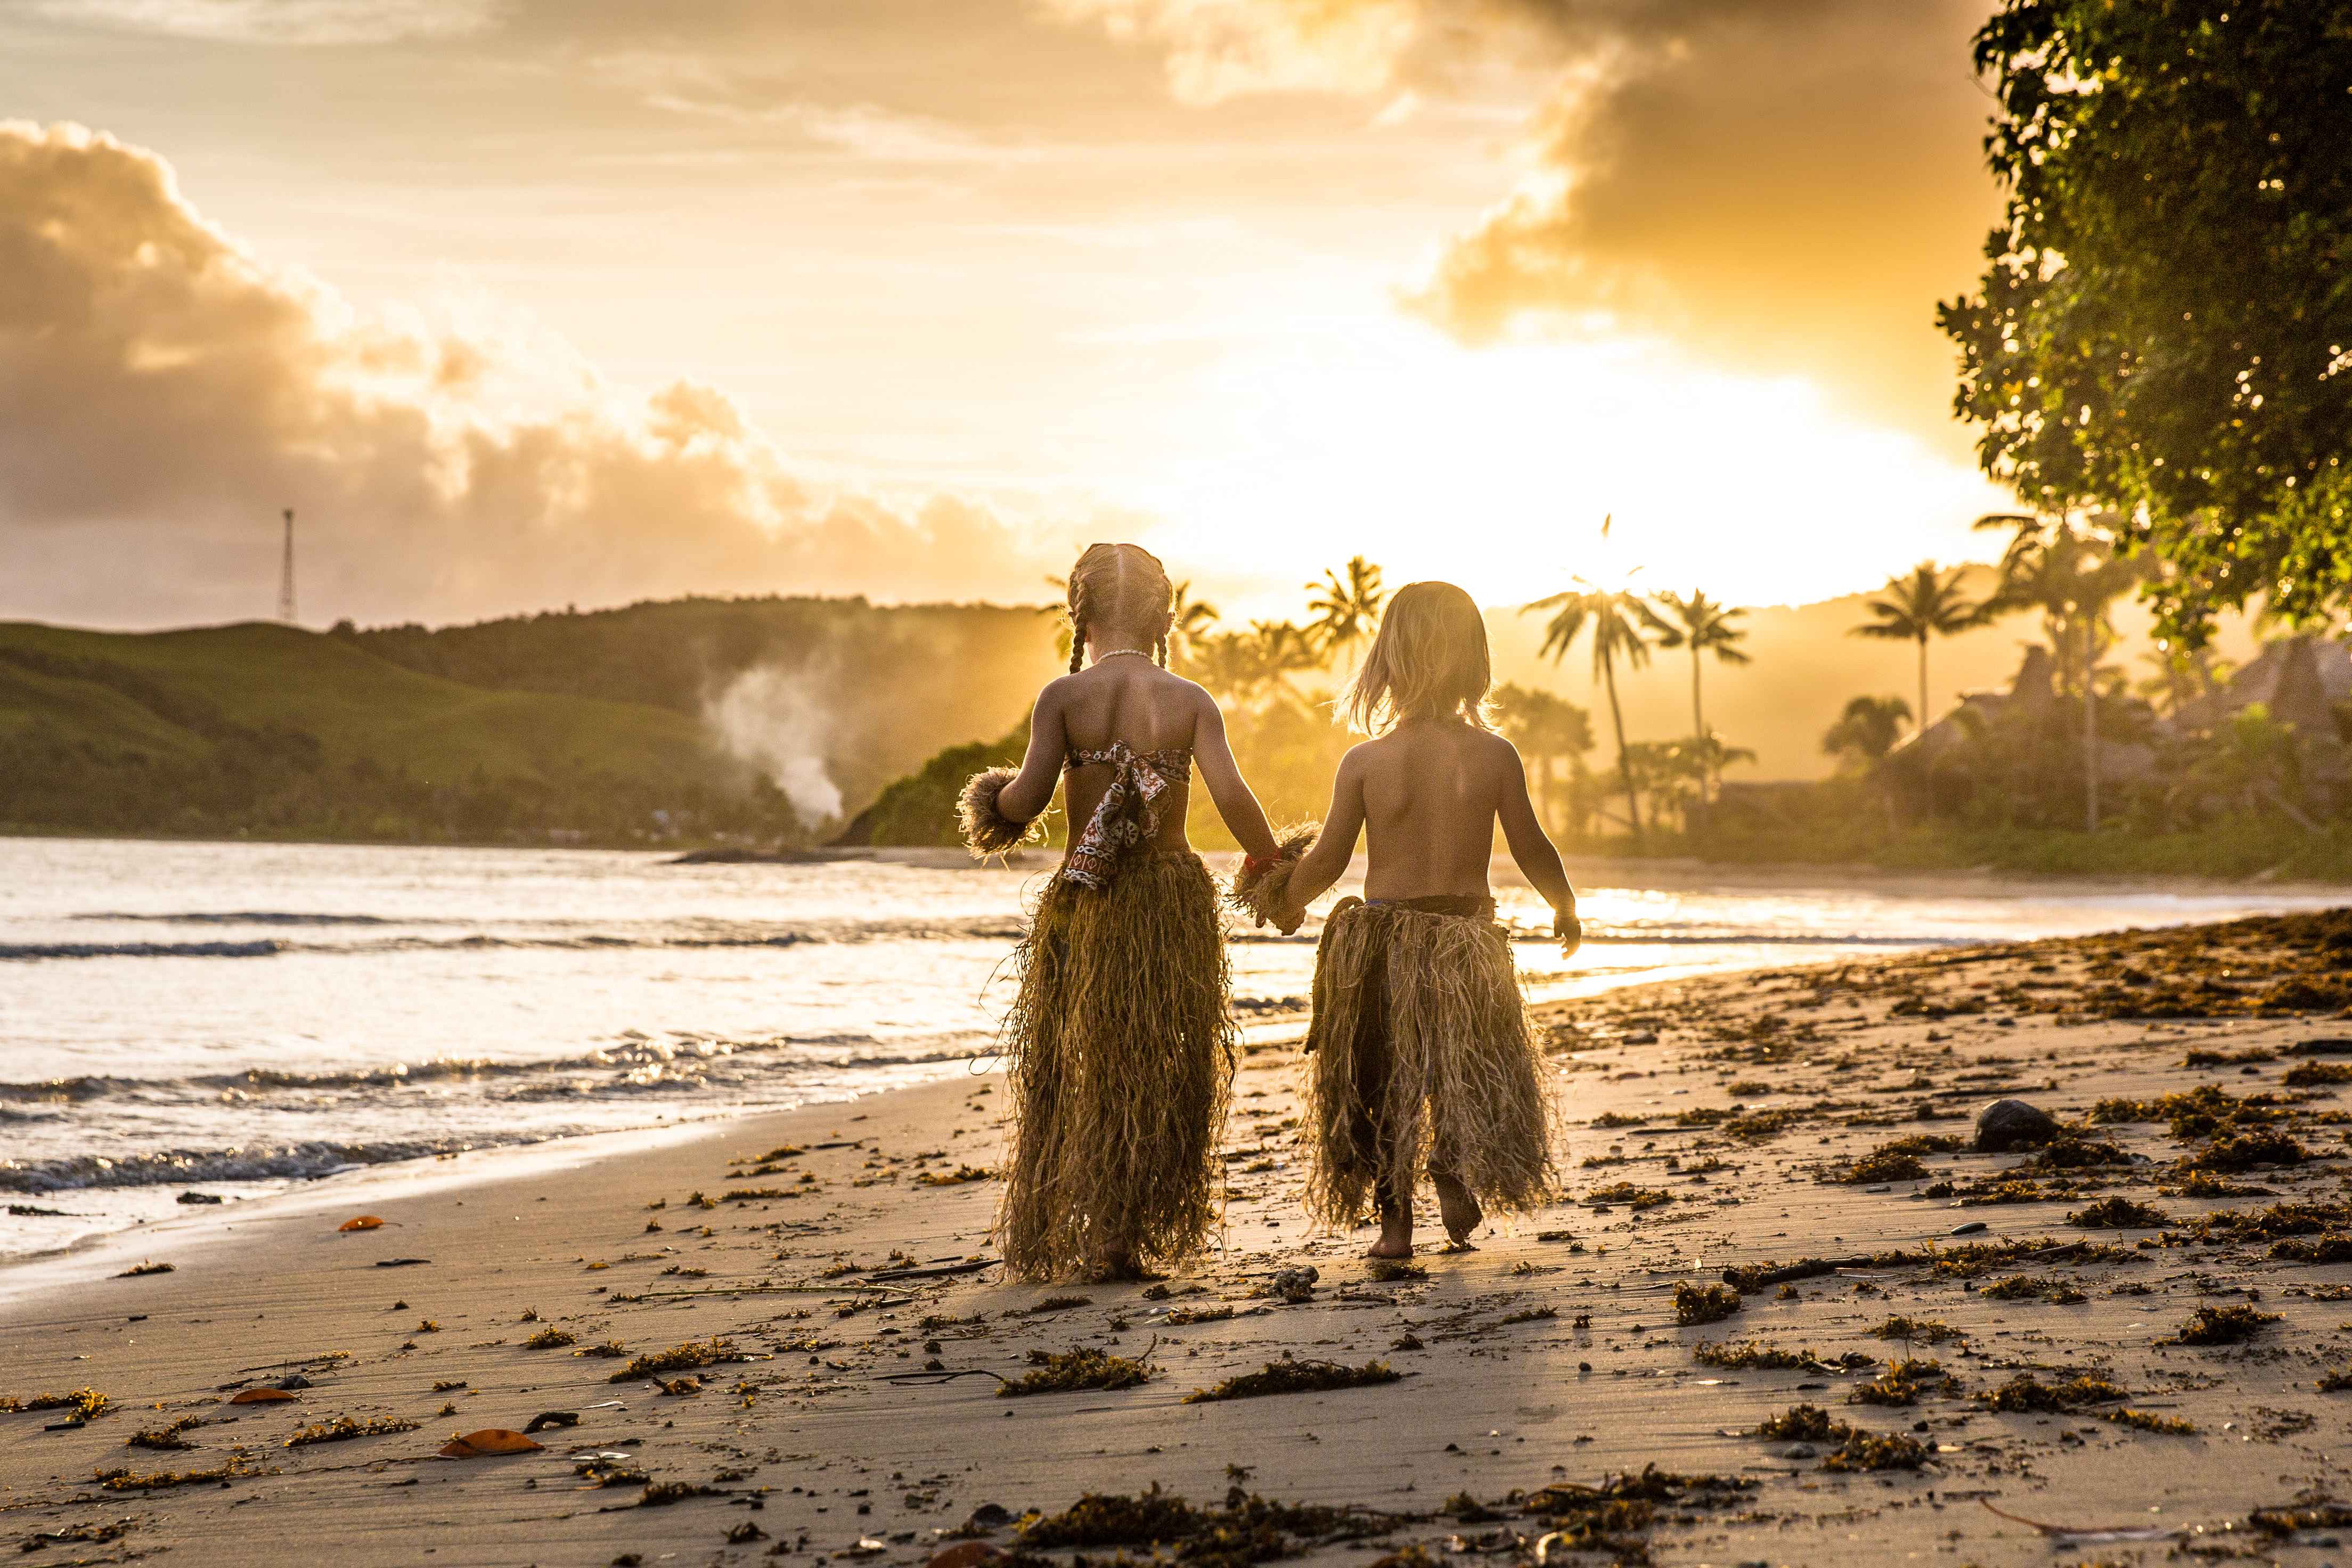 Fiji offers an easy cultural escape